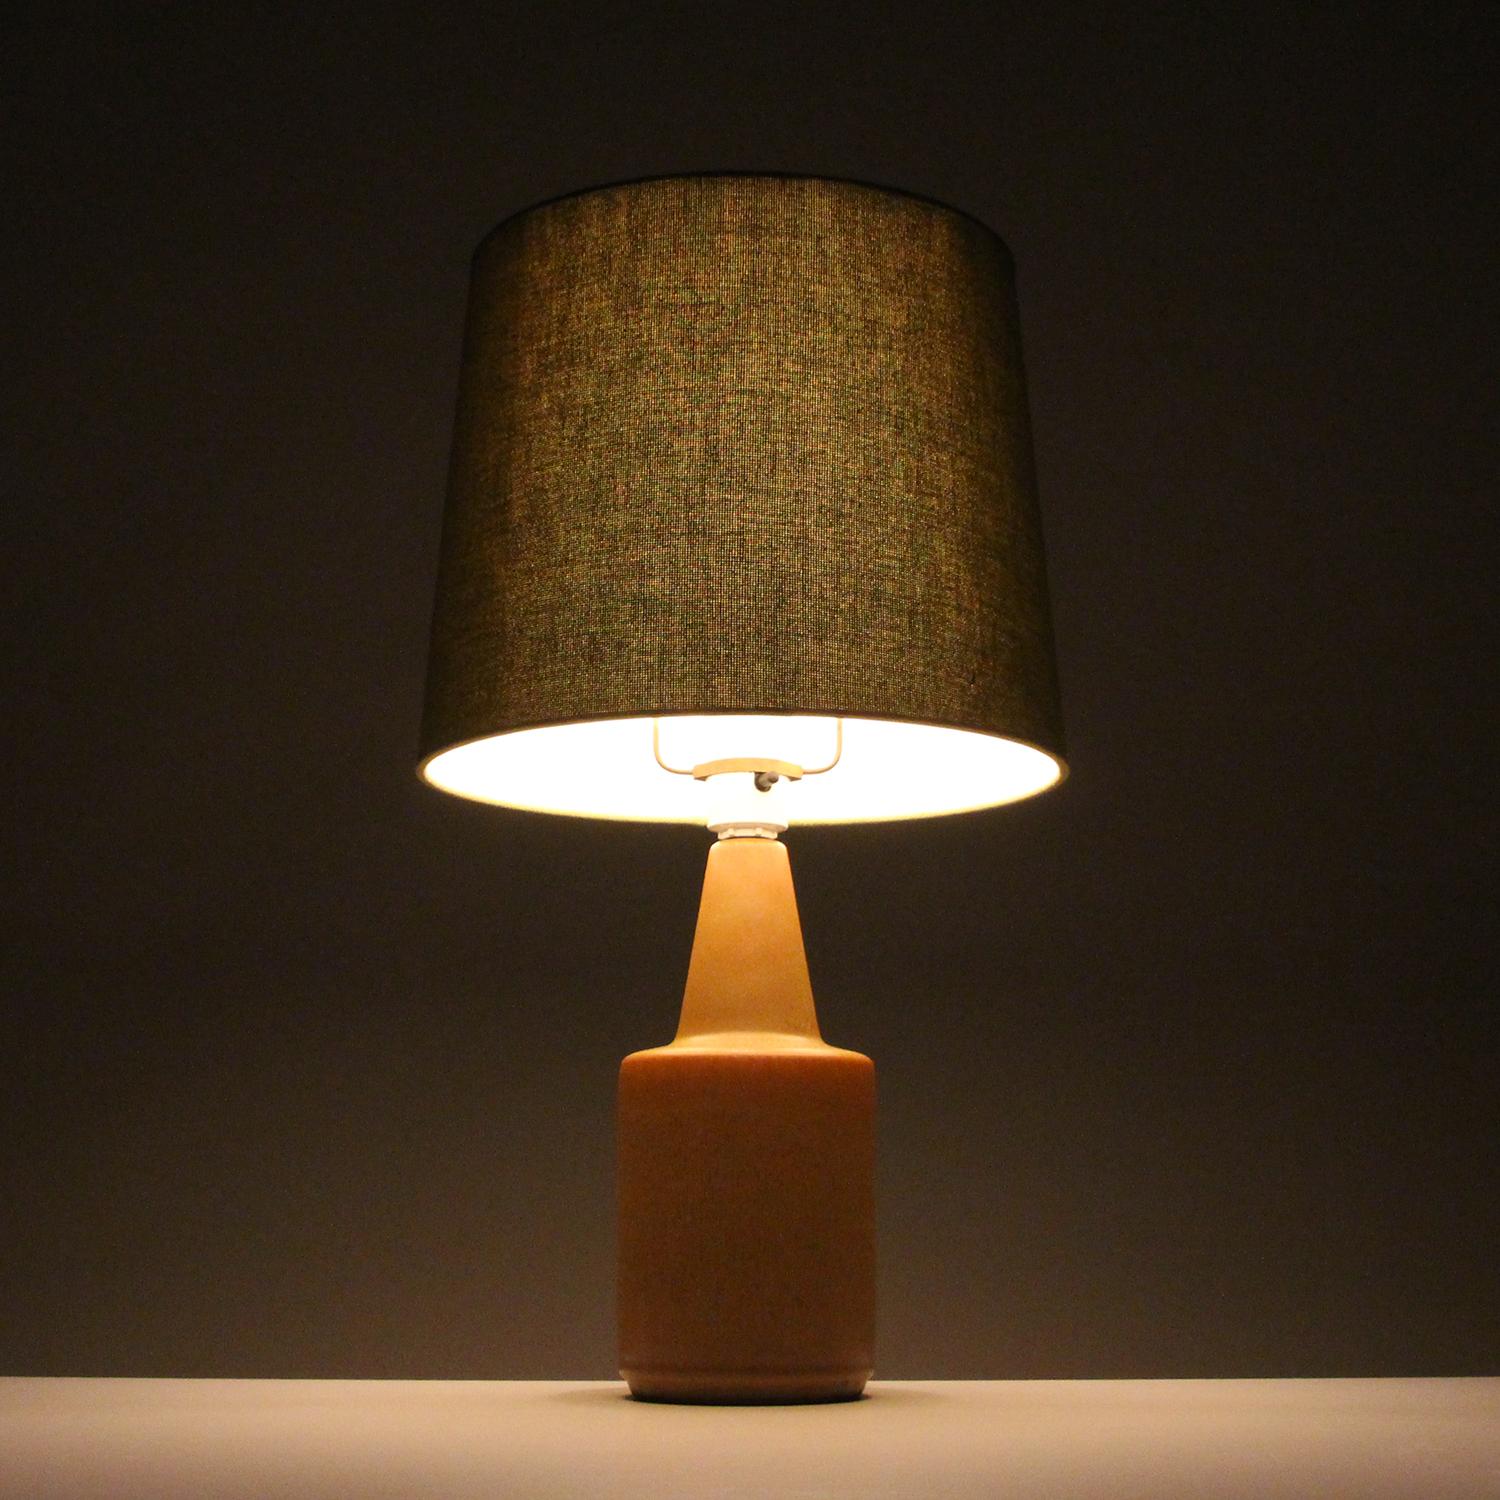 Danish Ceramic Table Lamp with Vintage Shade by Einar Johansen for Soholm, 1960s